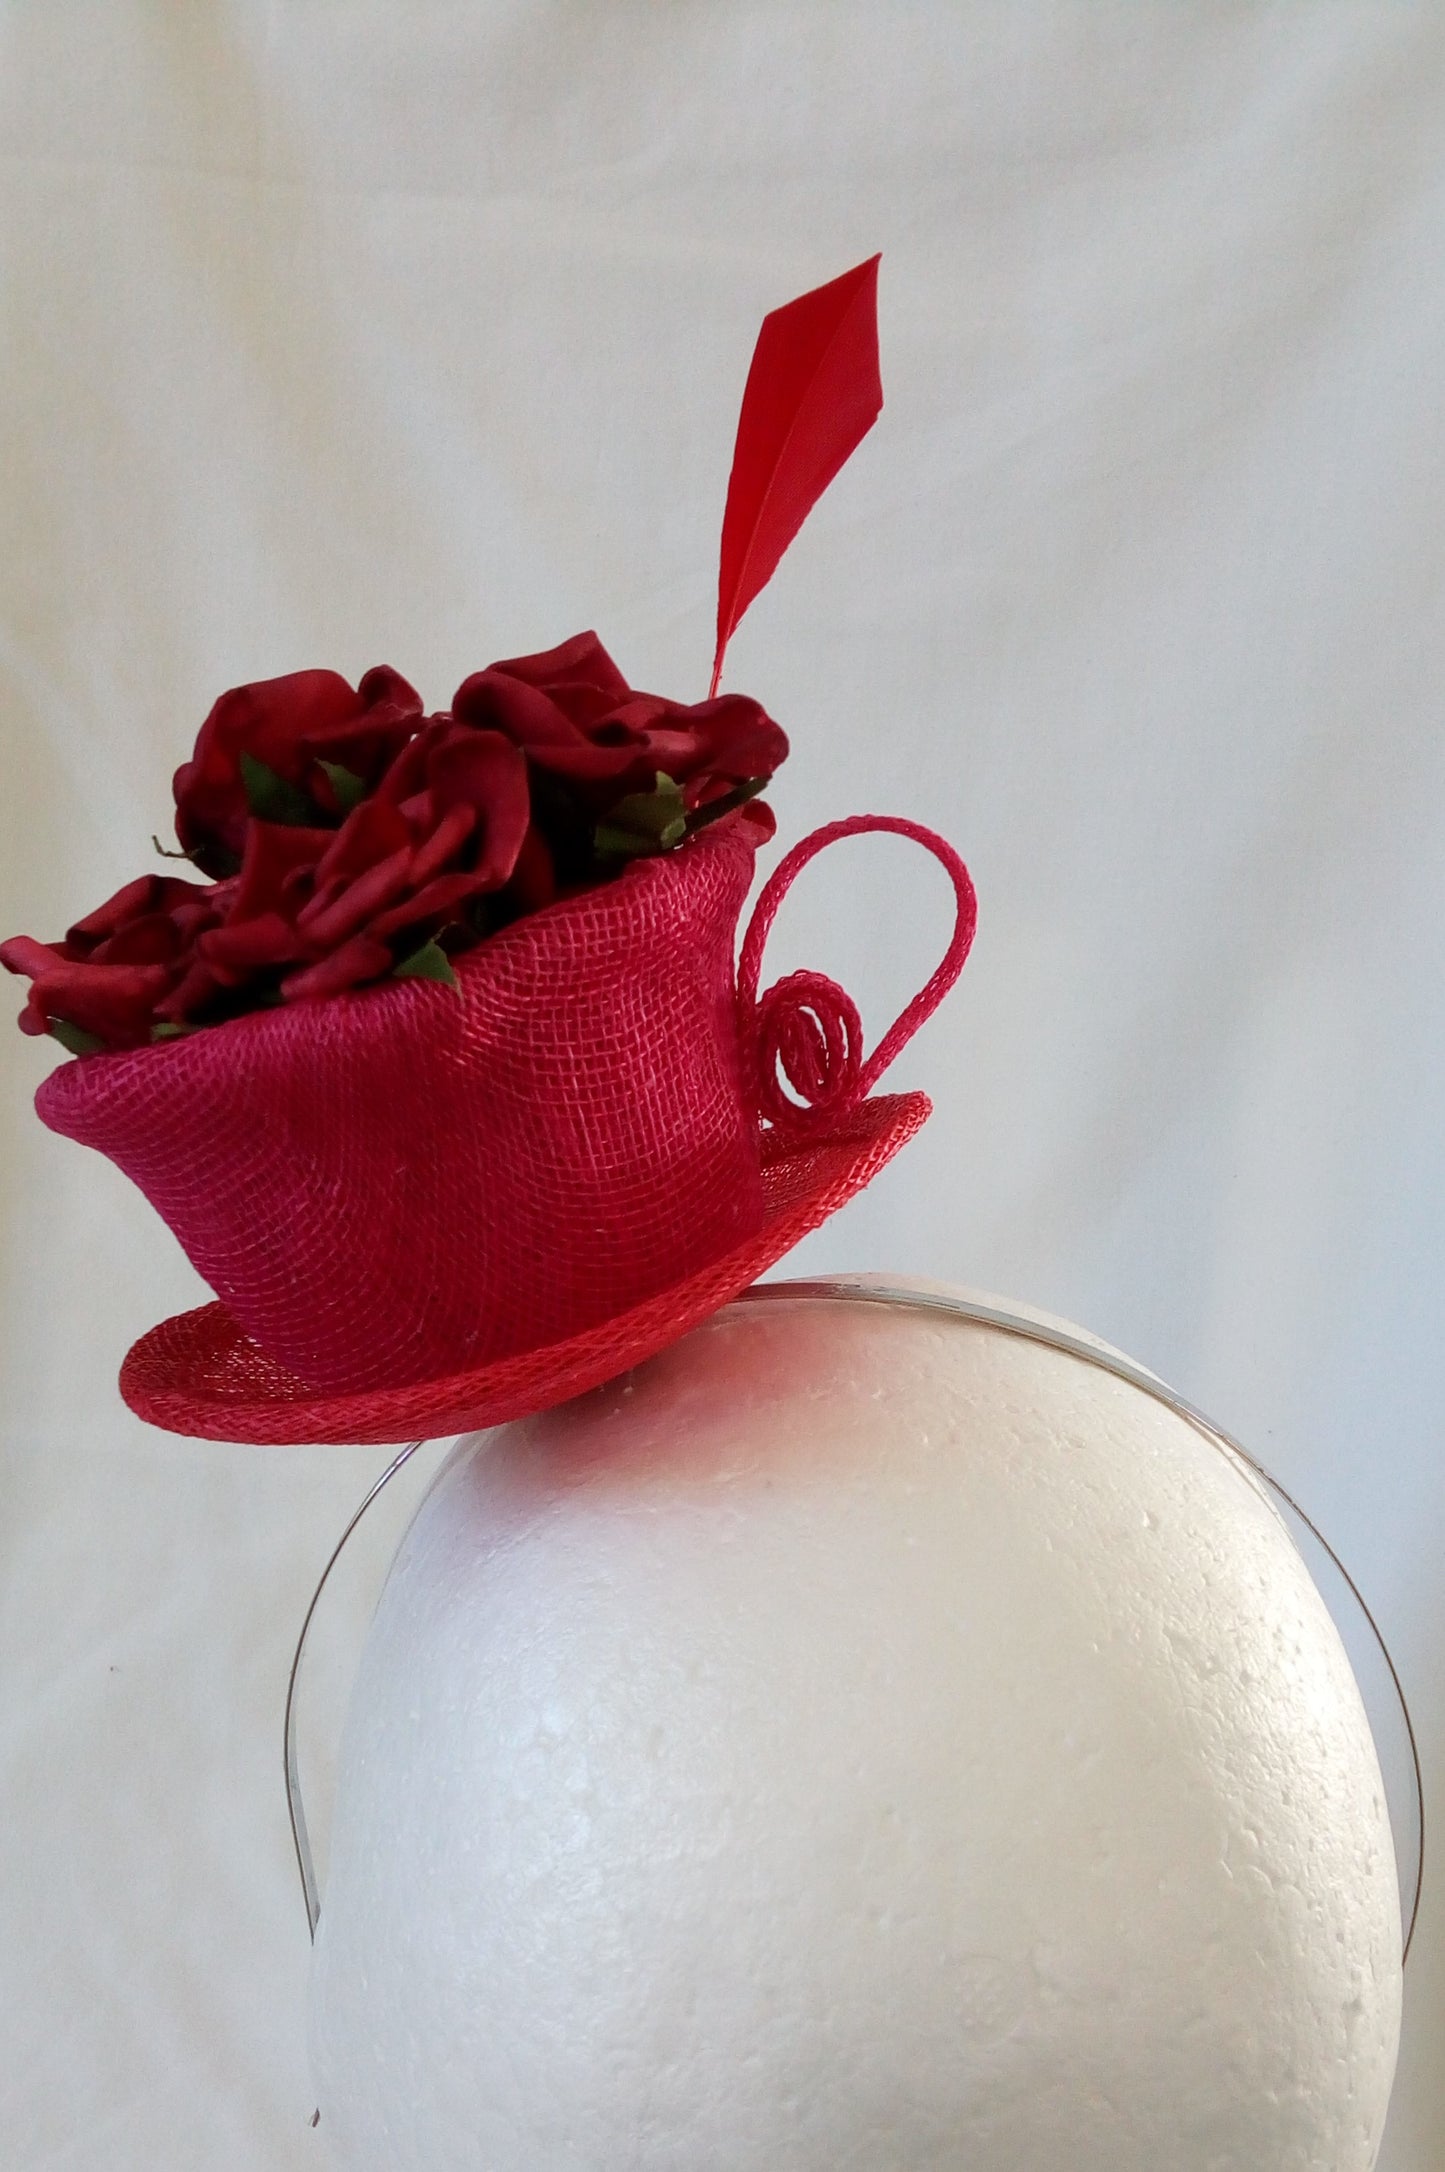 Rose sinamay cup and saucer headpiece